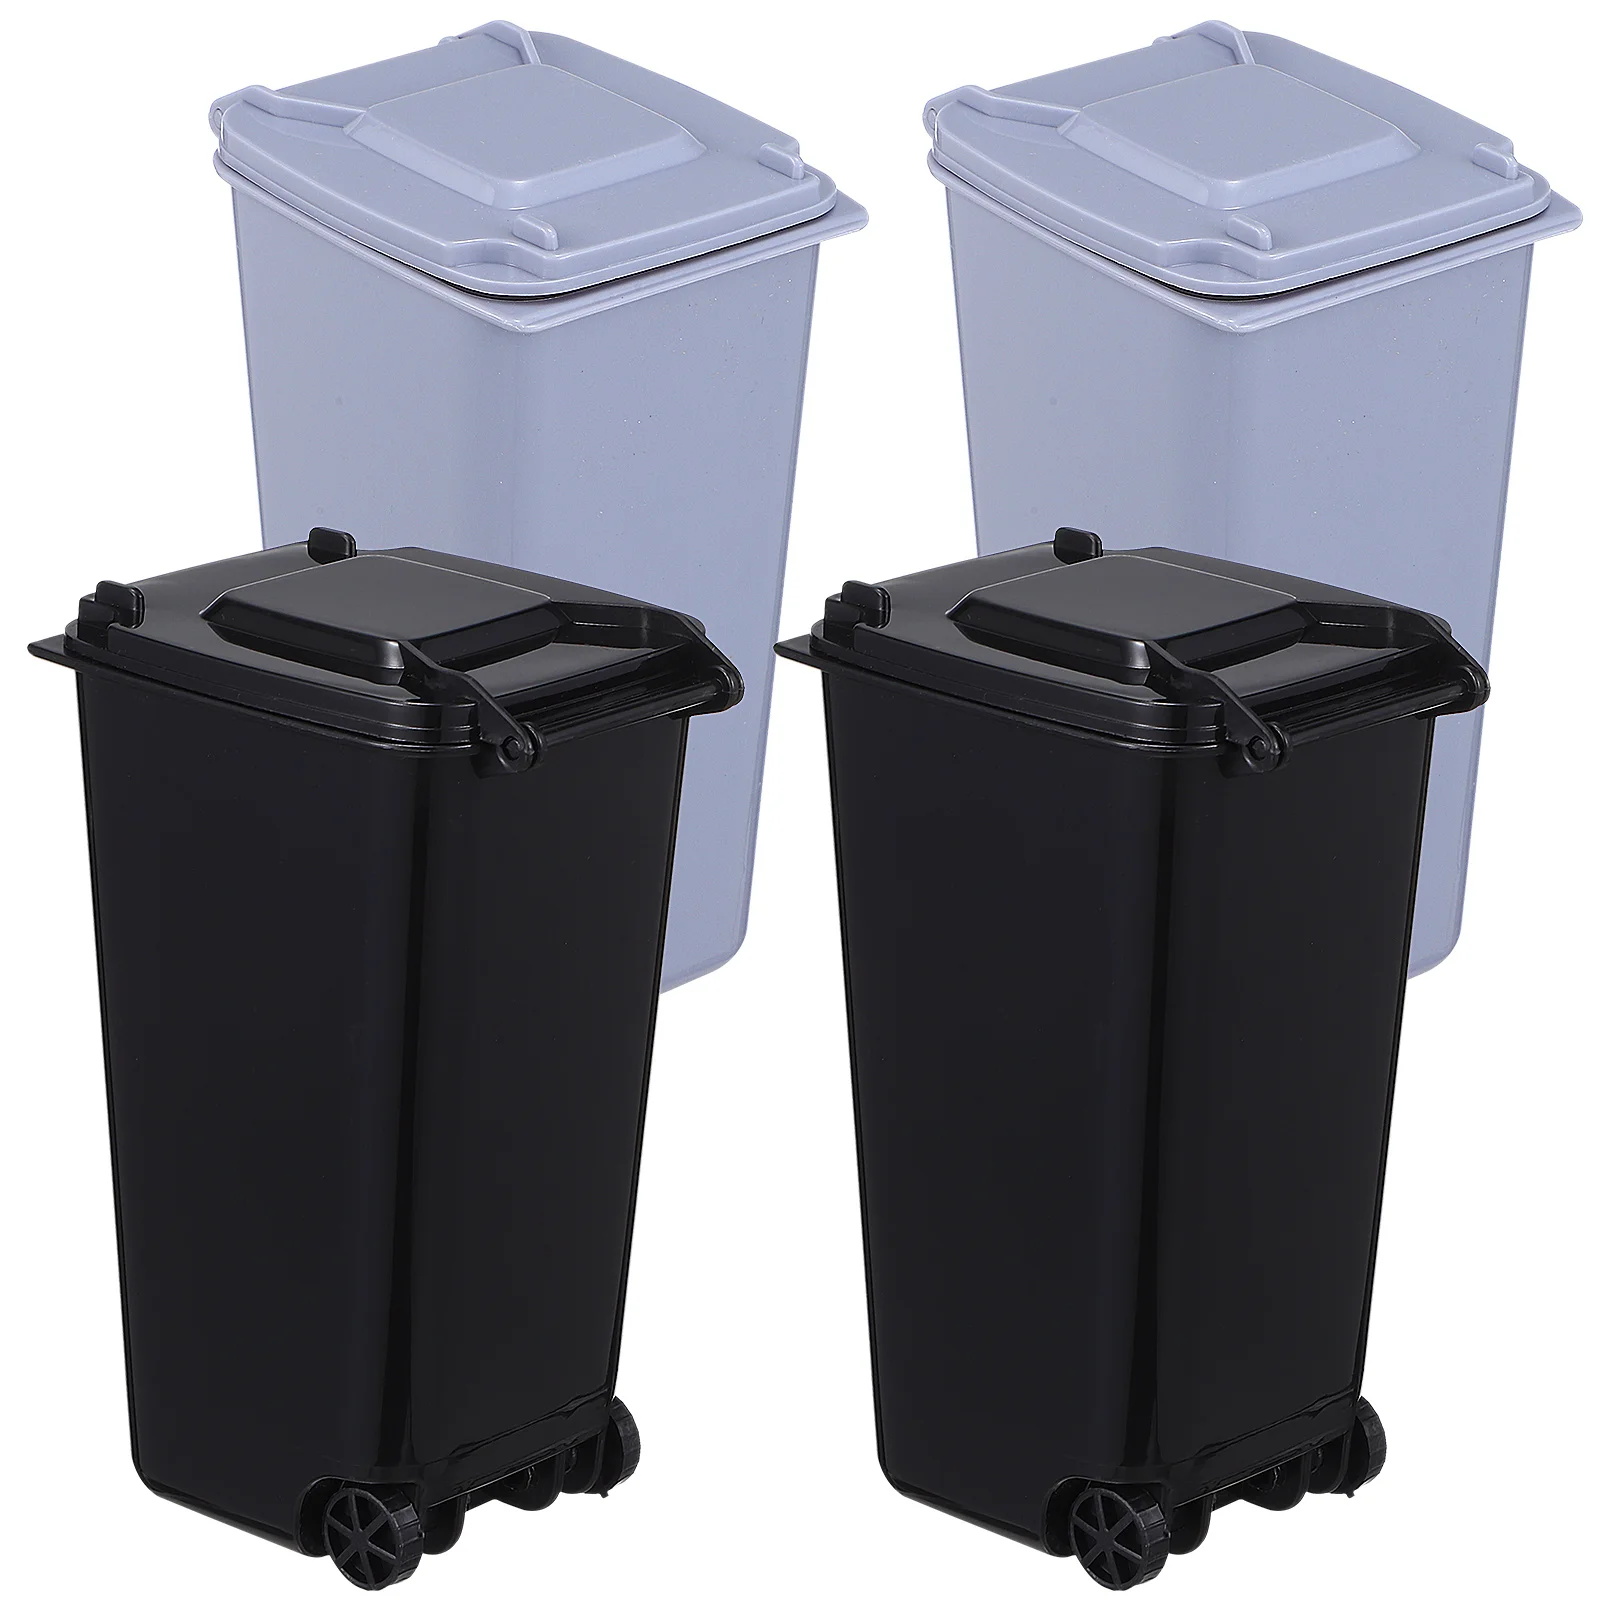 

4 PCS Mini Bins Small Trash Cans Waste Paper Baskets Desk Office Stationery Organisers Holders